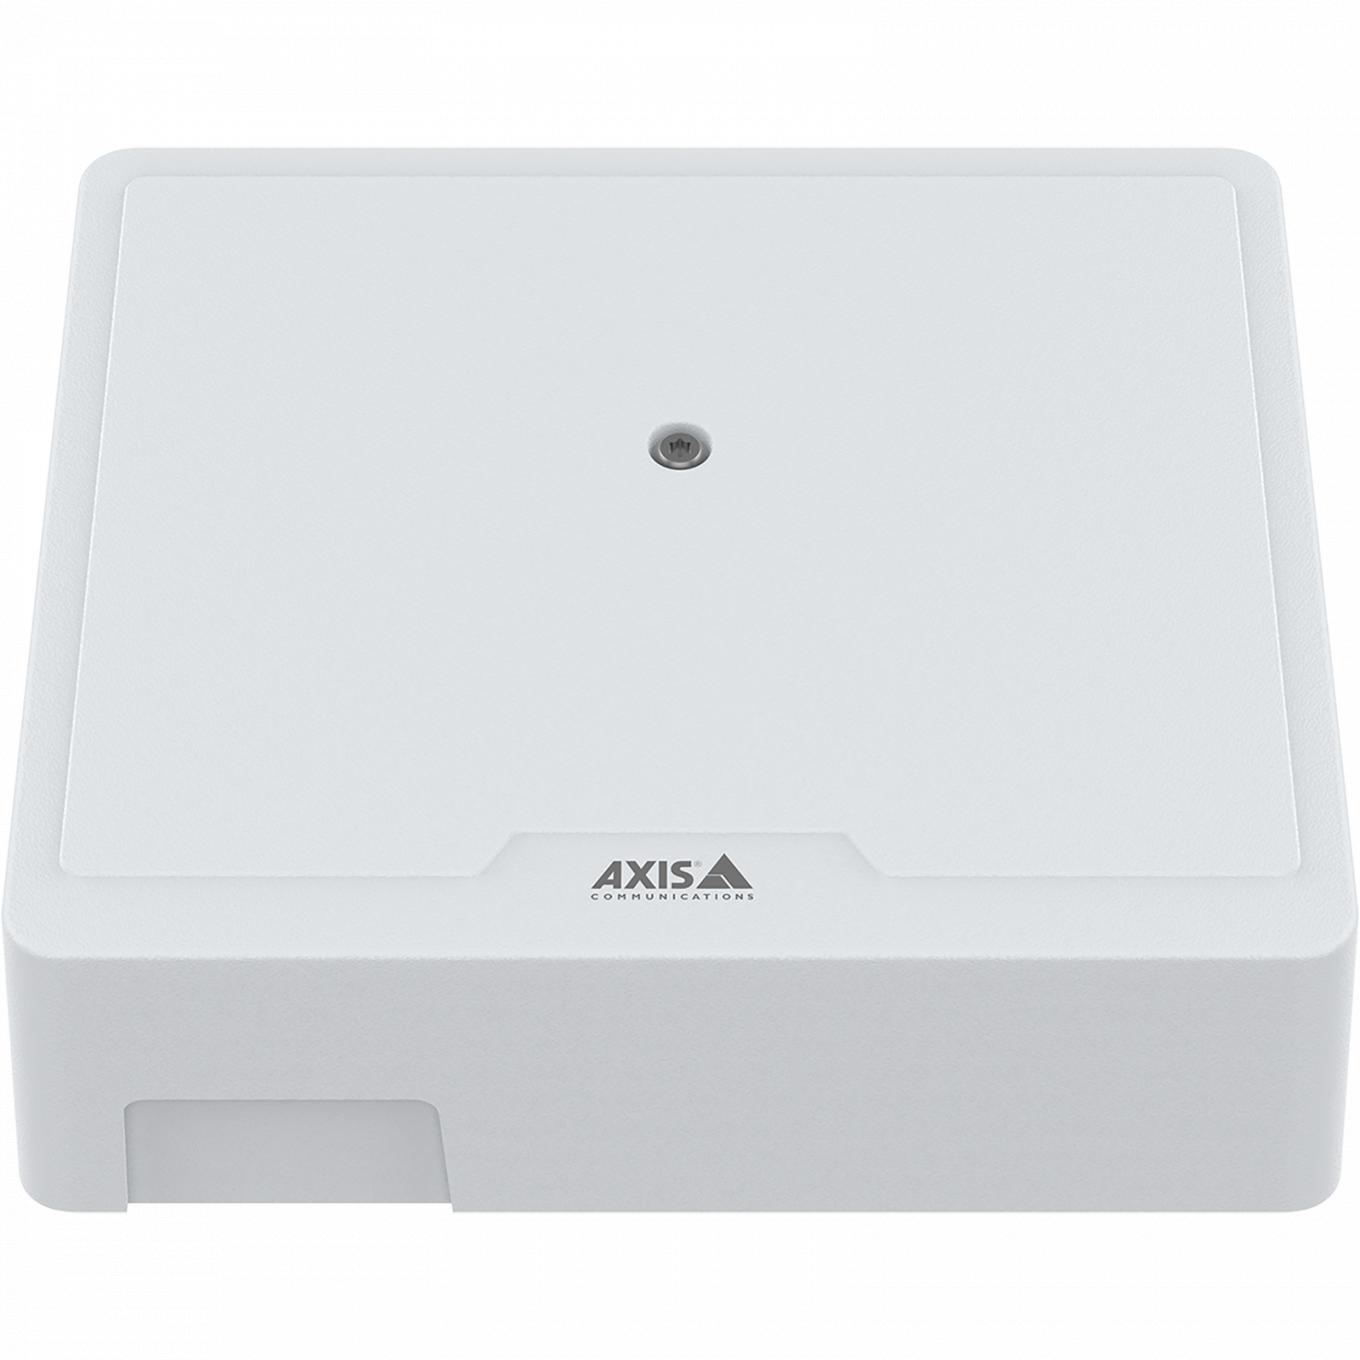 AXIS A1210 Network Door Controller (正面から見た図)